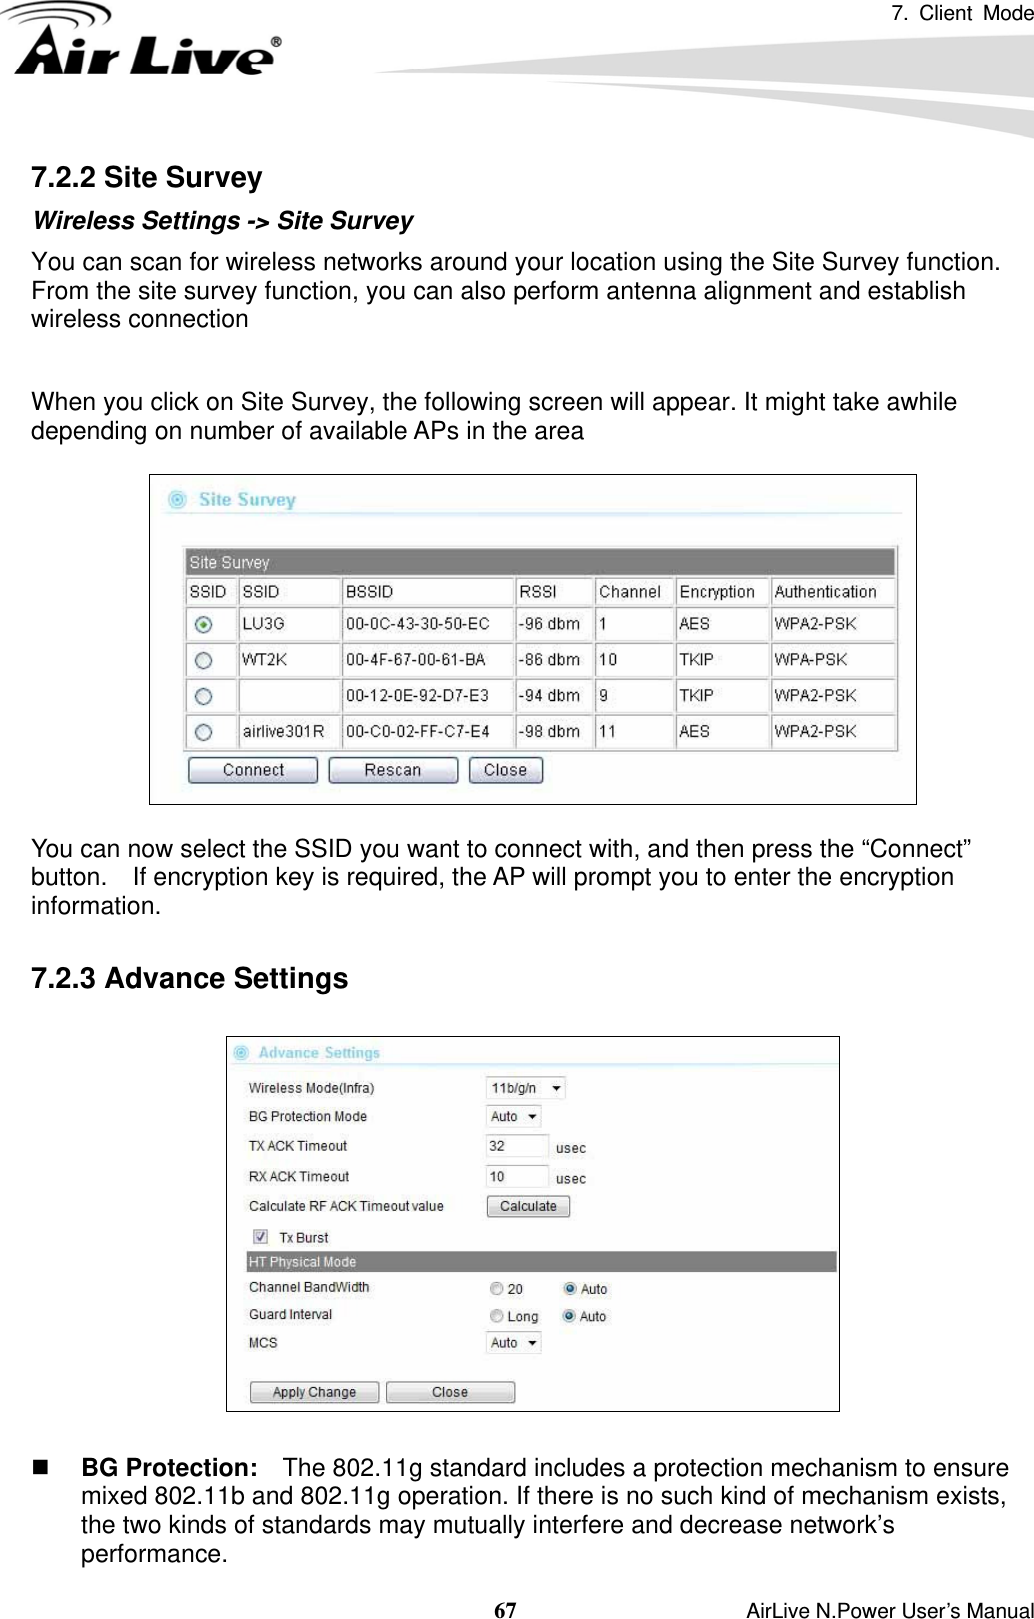 7. Client Mode  67                    AirLive N.Power User’s Manual 7.2.2 Site Survey Wireless Settings -&gt; Site Survey You can scan for wireless networks around your location using the Site Survey function.   From the site survey function, you can also perform antenna alignment and establish wireless connection  When you click on Site Survey, the following screen will appear. It might take awhile depending on number of available APs in the area    You can now select the SSID you want to connect with, and then press the “Connect” button.    If encryption key is required, the AP will prompt you to enter the encryption information.  7.2.3 Advance Settings     BG Protection:    The 802.11g standard includes a protection mechanism to ensure mixed 802.11b and 802.11g operation. If there is no such kind of mechanism exists, the two kinds of standards may mutually interfere and decrease network’s performance. 